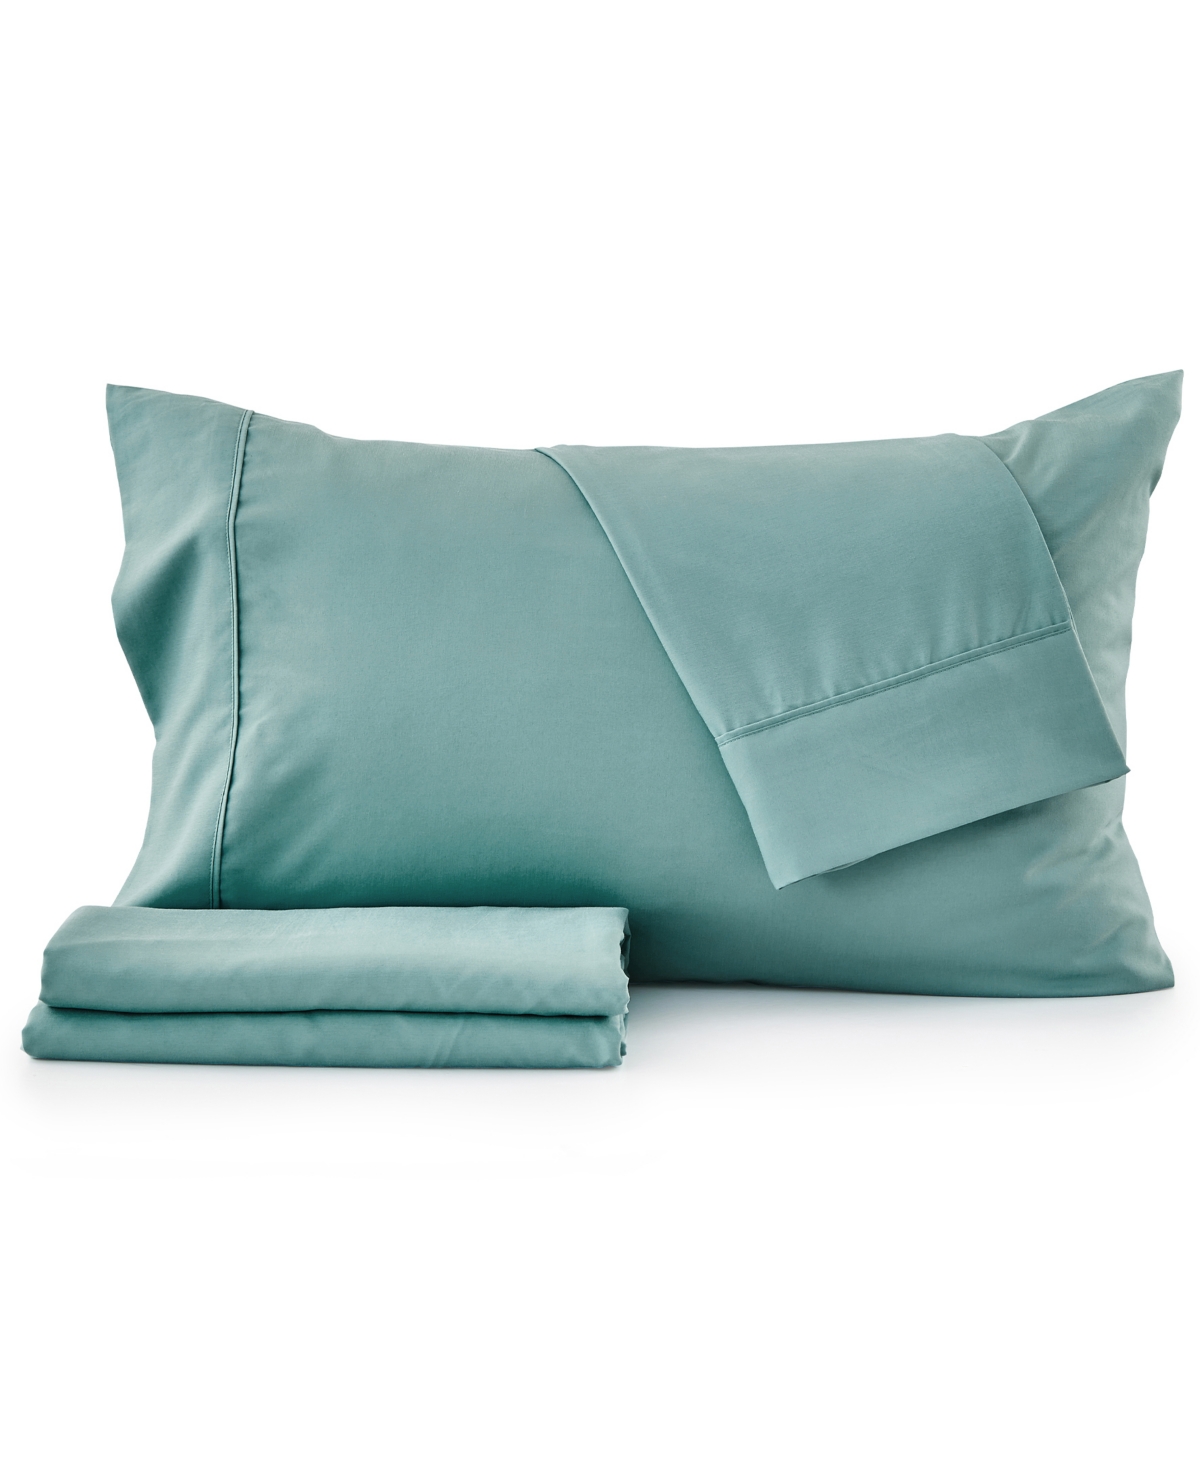 Premium Comforts Rayon From Bamboo Blend Crease-resistant 4 Piece Sheet Set, Full In Sea